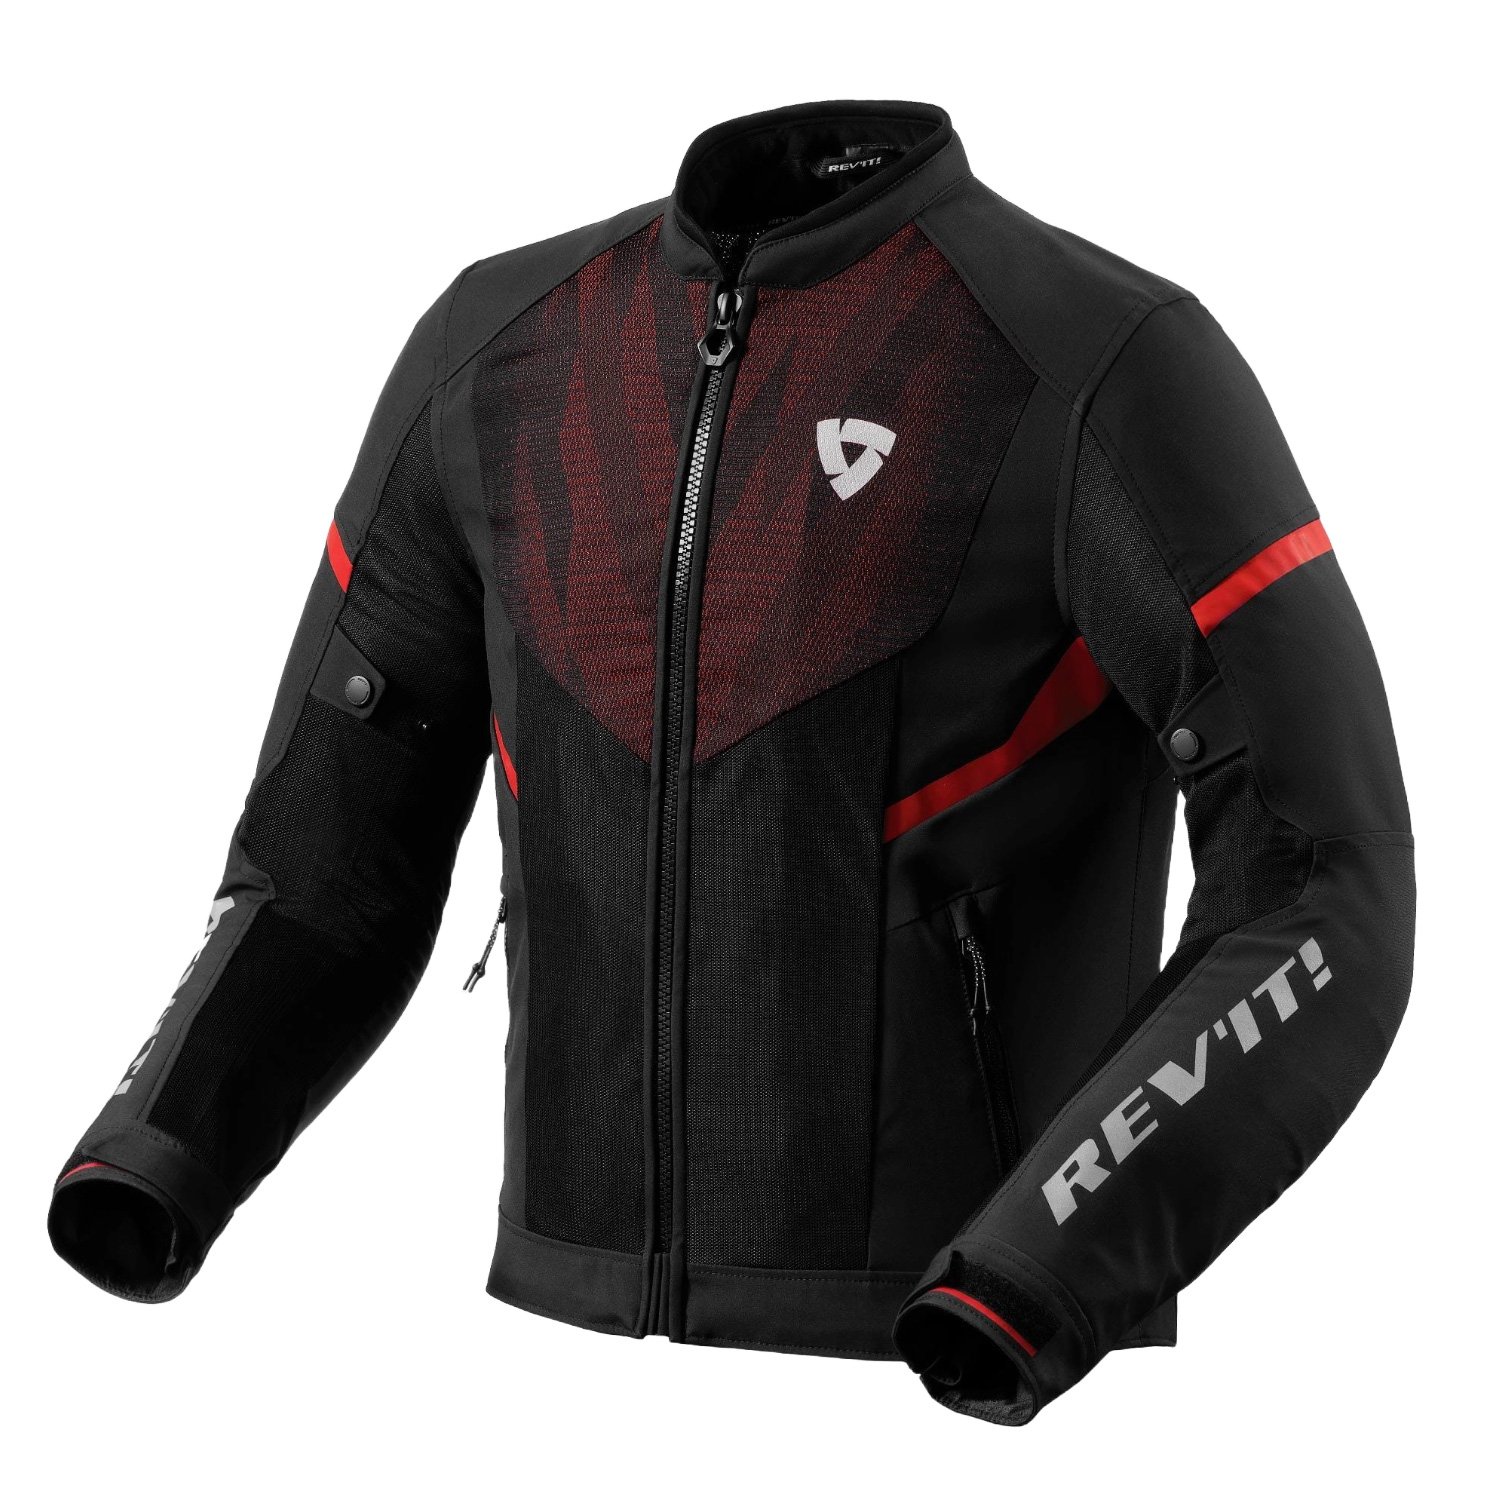 Image of REV'IT! Hyperspeed 2 GT Air Jacket Black Neon Red Size 3XL ID 8700001367516